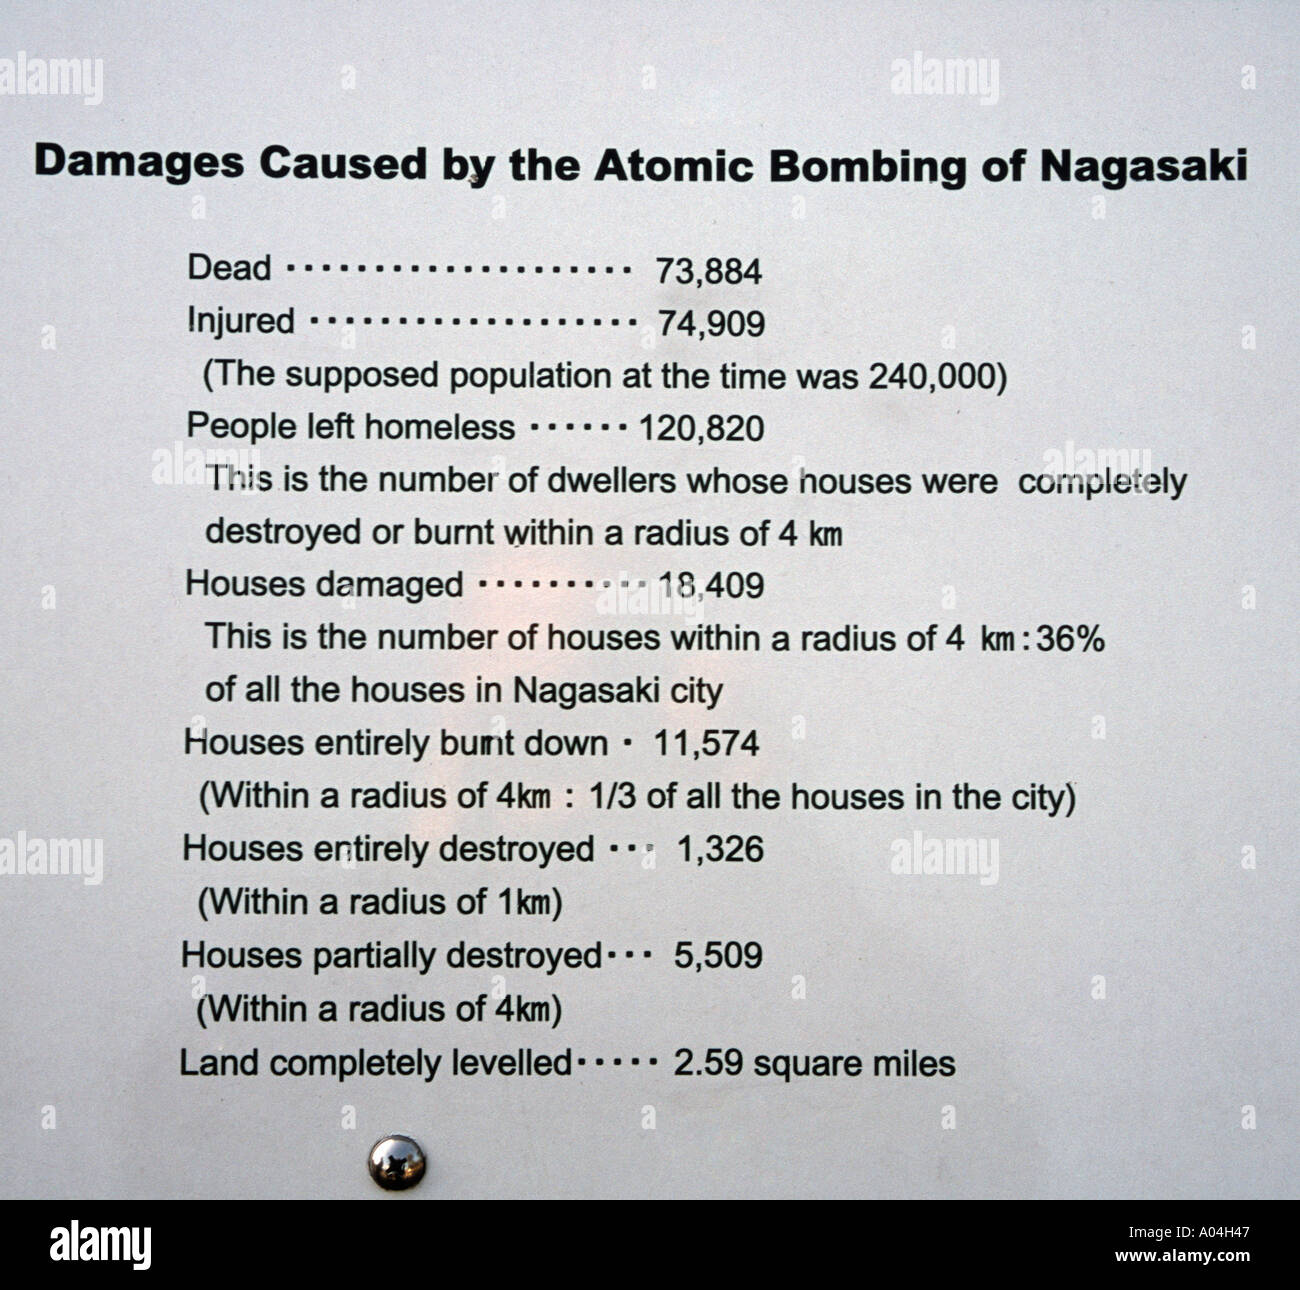 Sign showing damage caused by the atomic bombing of Nagasaki in WW2 Stock Photo